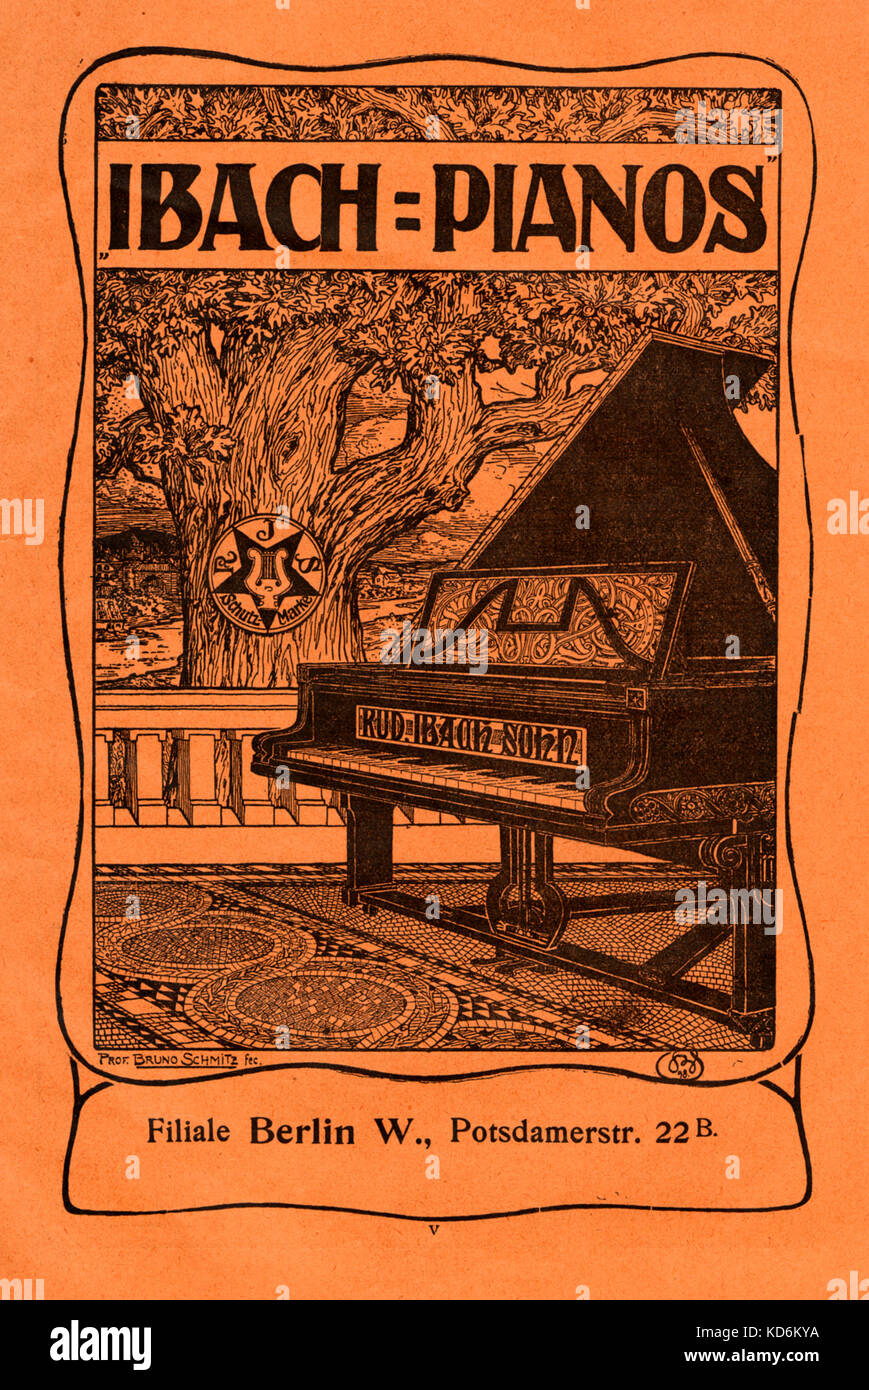 Ibach pianos - early 20th century advertisement. with Berlin address: Potsdamerstrasse 22B, Berlin West. Stock Photo